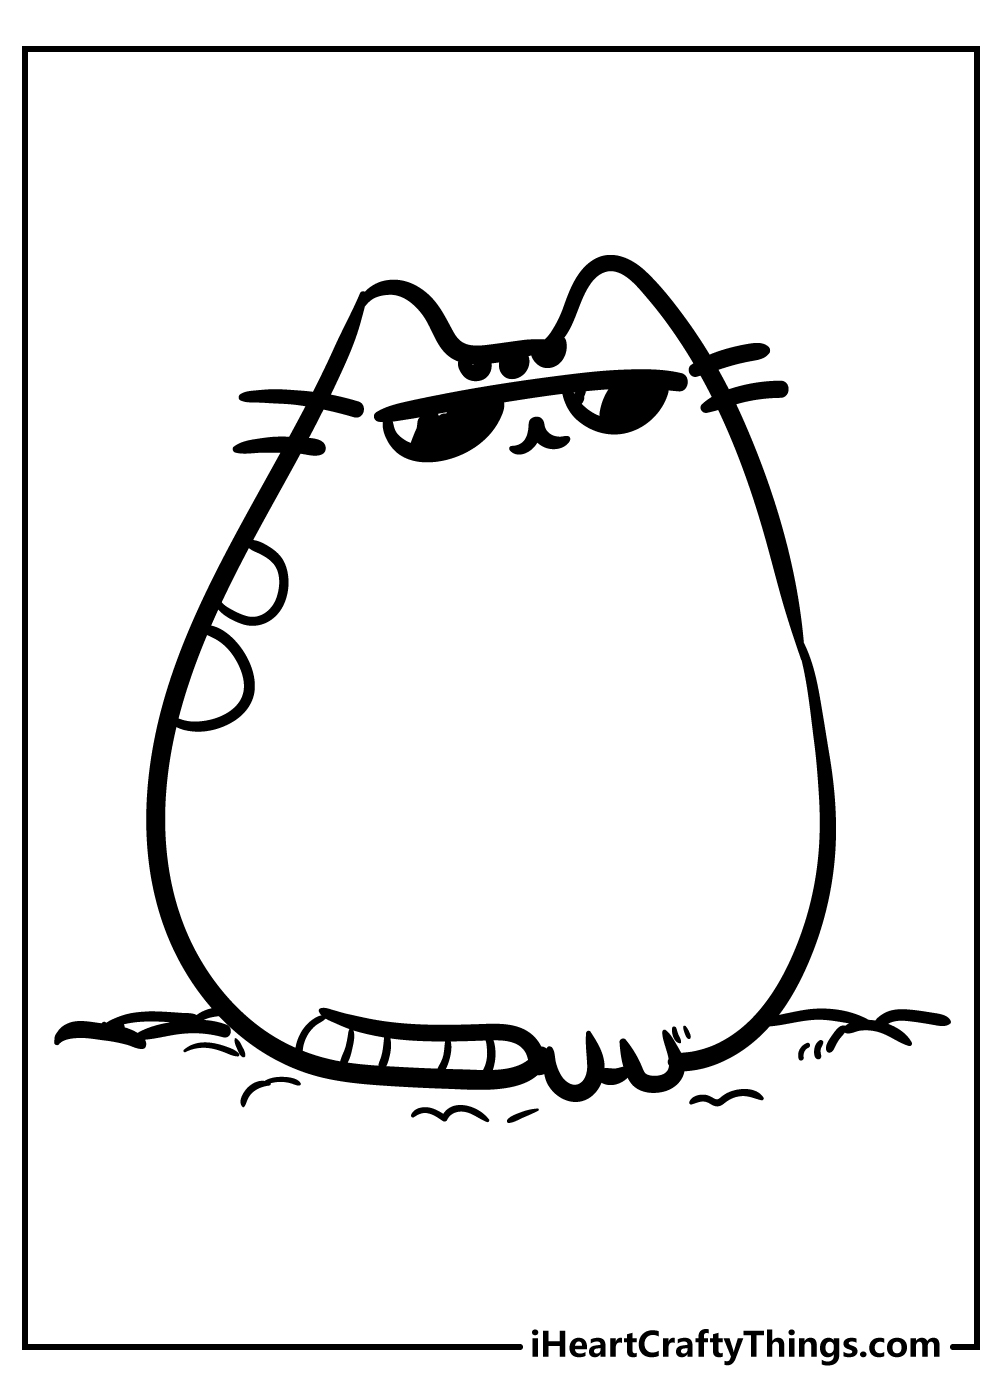 Pusheen coloring pages free printables